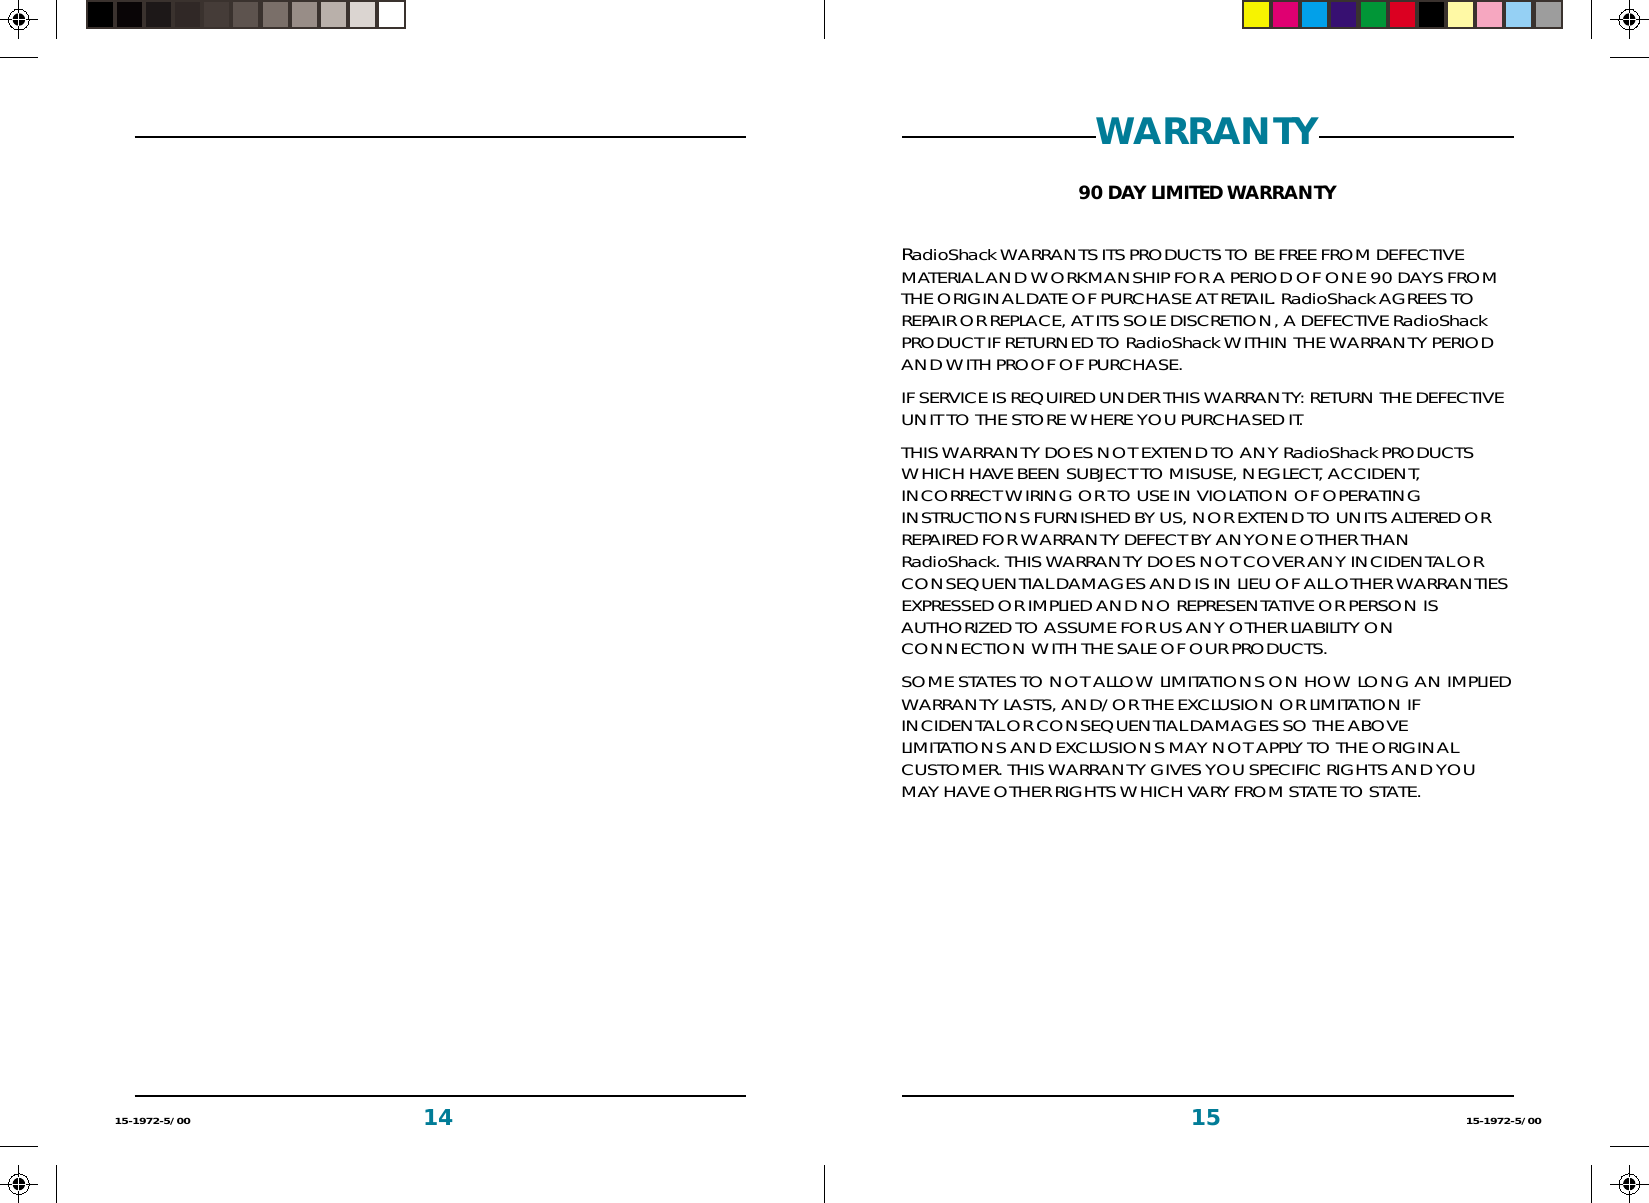 15 15-1972-5/001415-1972-5/00WARRANTY90 DAY LIMITED WARRANTYRadioShack WARRANTS ITS PRODUCTS TO BE FREE FROM DEFECTIVEMATERIAL AND WORKMANSHIP FOR A PERIOD OF ONE 90 DAYS FROMTHE ORIGINAL DATE OF PURCHASE AT RETAIL. RadioShack AGREES TOREPAIR OR REPLACE, AT ITS SOLE DISCRETION, A DEFECTIVE RadioShackPRODUCT IF RETURNED TO RadioShack WITHIN THE WARRANTY PERIODAND WITH PROOF OF PURCHASE.IF SERVICE IS REQUIRED UNDER THIS WARRANTY: RETURN THE DEFECTIVEUNIT TO THE STORE WHERE YOU PURCHASED IT.THIS WARRANTY DOES NOT EXTEND TO ANY RadioShack PRODUCTSWHICH HAVE BEEN SUBJECT TO MISUSE, NEGLECT, ACCIDENT,INCORRECT WIRING OR TO USE IN VIOLATION OF OPERATINGINSTRUCTIONS FURNISHED BY US, NOR EXTEND TO UNITS ALTERED ORREPAIRED FOR WARRANTY DEFECT BY ANYONE OTHER THANRadioShack. THIS WARRANTY DOES NOT COVER ANY INCIDENTAL ORCONSEQUENTIAL DAMAGES AND IS IN LIEU OF ALL OTHER WARRANTIESEXPRESSED OR IMPLIED AND NO REPRESENTATIVE OR PERSON ISAUTHORIZED TO ASSUME FOR US ANY OTHER LIABILITY ONCONNECTION WITH THE SALE OF OUR PRODUCTS.SOME STATES TO NOT ALLOW LIMITATIONS ON HOW LONG AN IMPLIEDWARRANTY LASTS, AND/OR THE EXCLUSION OR LIMITATION IFINCIDENTAL OR CONSEQUENTIAL DAMAGES SO THE ABOVELIMITATIONS AND EXCLUSIONS MAY NOT APPLY TO THE ORIGINALCUSTOMER. THIS WARRANTY GIVES YOU SPECIFIC RIGHTS AND YOUMAY HAVE OTHER RIGHTS WHICH VARY FROM STATE TO STATE.